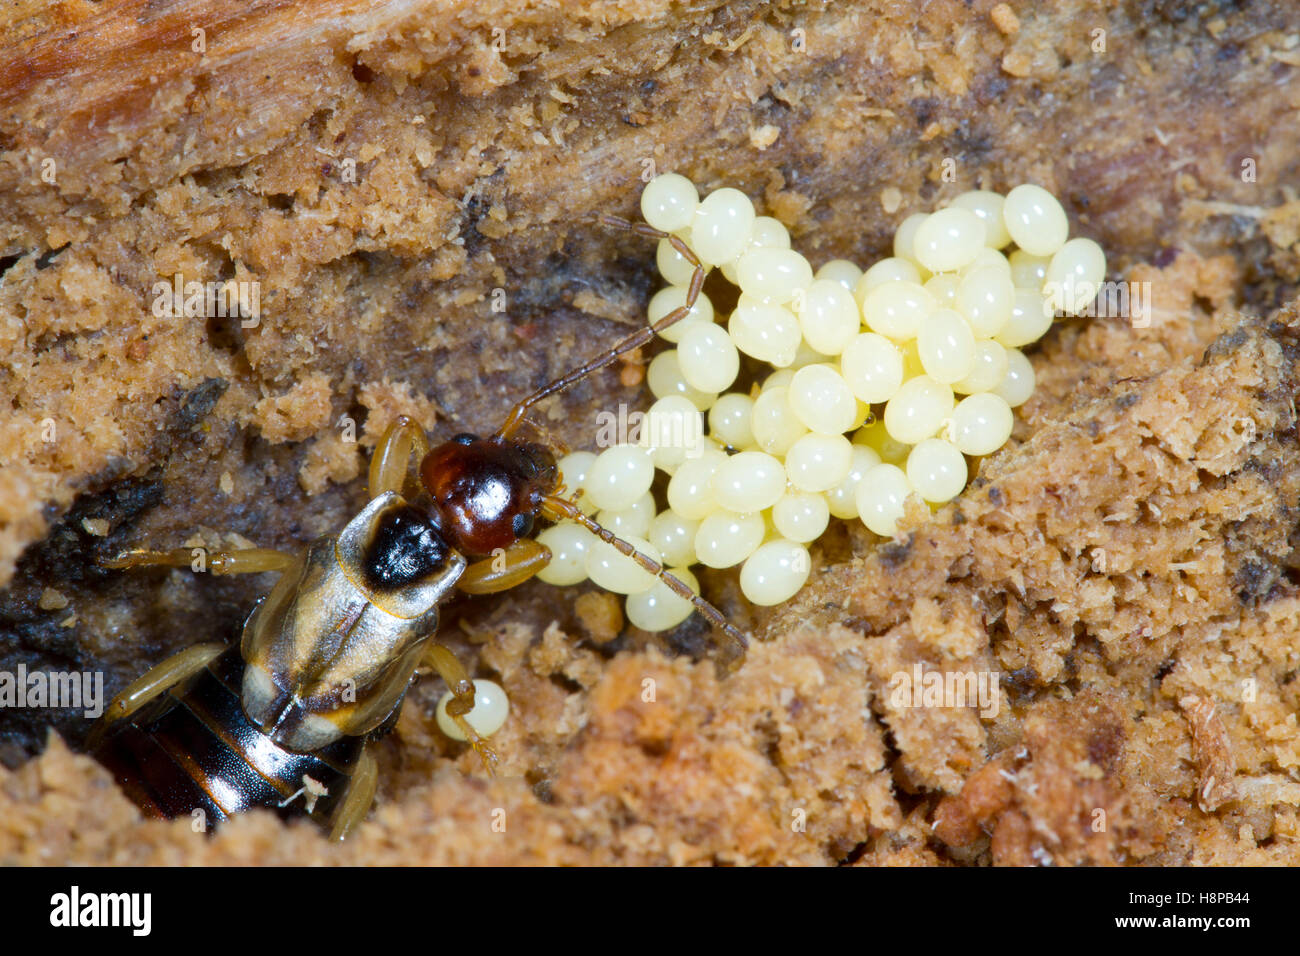 Common Earwig (Forficula auricularia) adult female in nest, tending eggs. Powys, Wales. March. Stock Photo